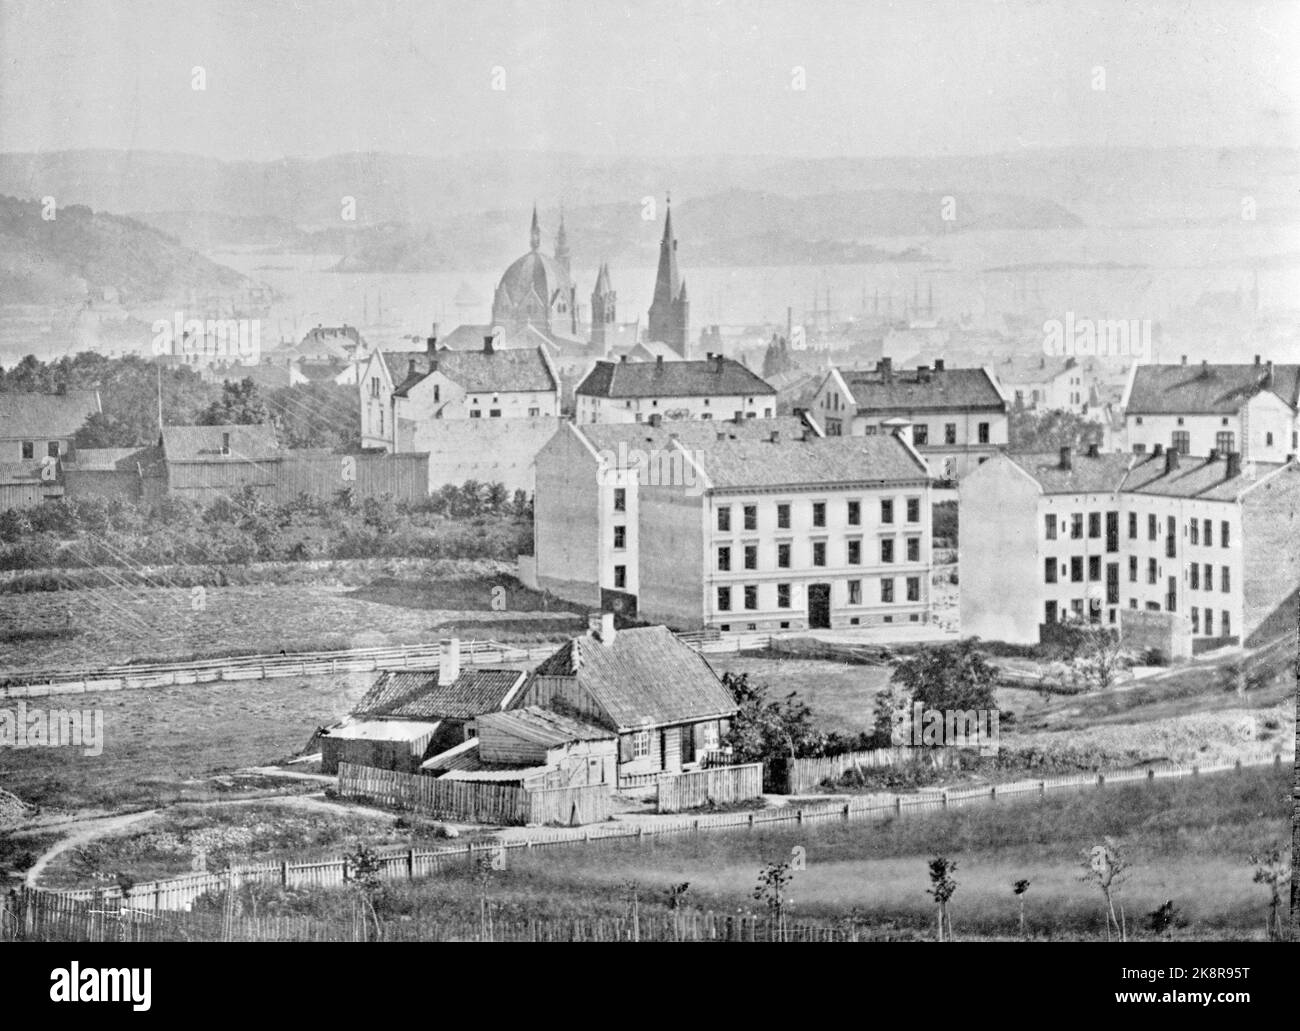 Oslo (undated, c. 1880?). View from St. Hanshaugen. Scattered buildings. The place Mærrahaugen in the foreground. Otherwise mix of urban farms and wooden buildings. The Oslo Fjord in the background. Trinity Church and St. Olav's Church. Sailing vessels were glimpsed at the harbor. A-85. Photo: NTB Stock Photo